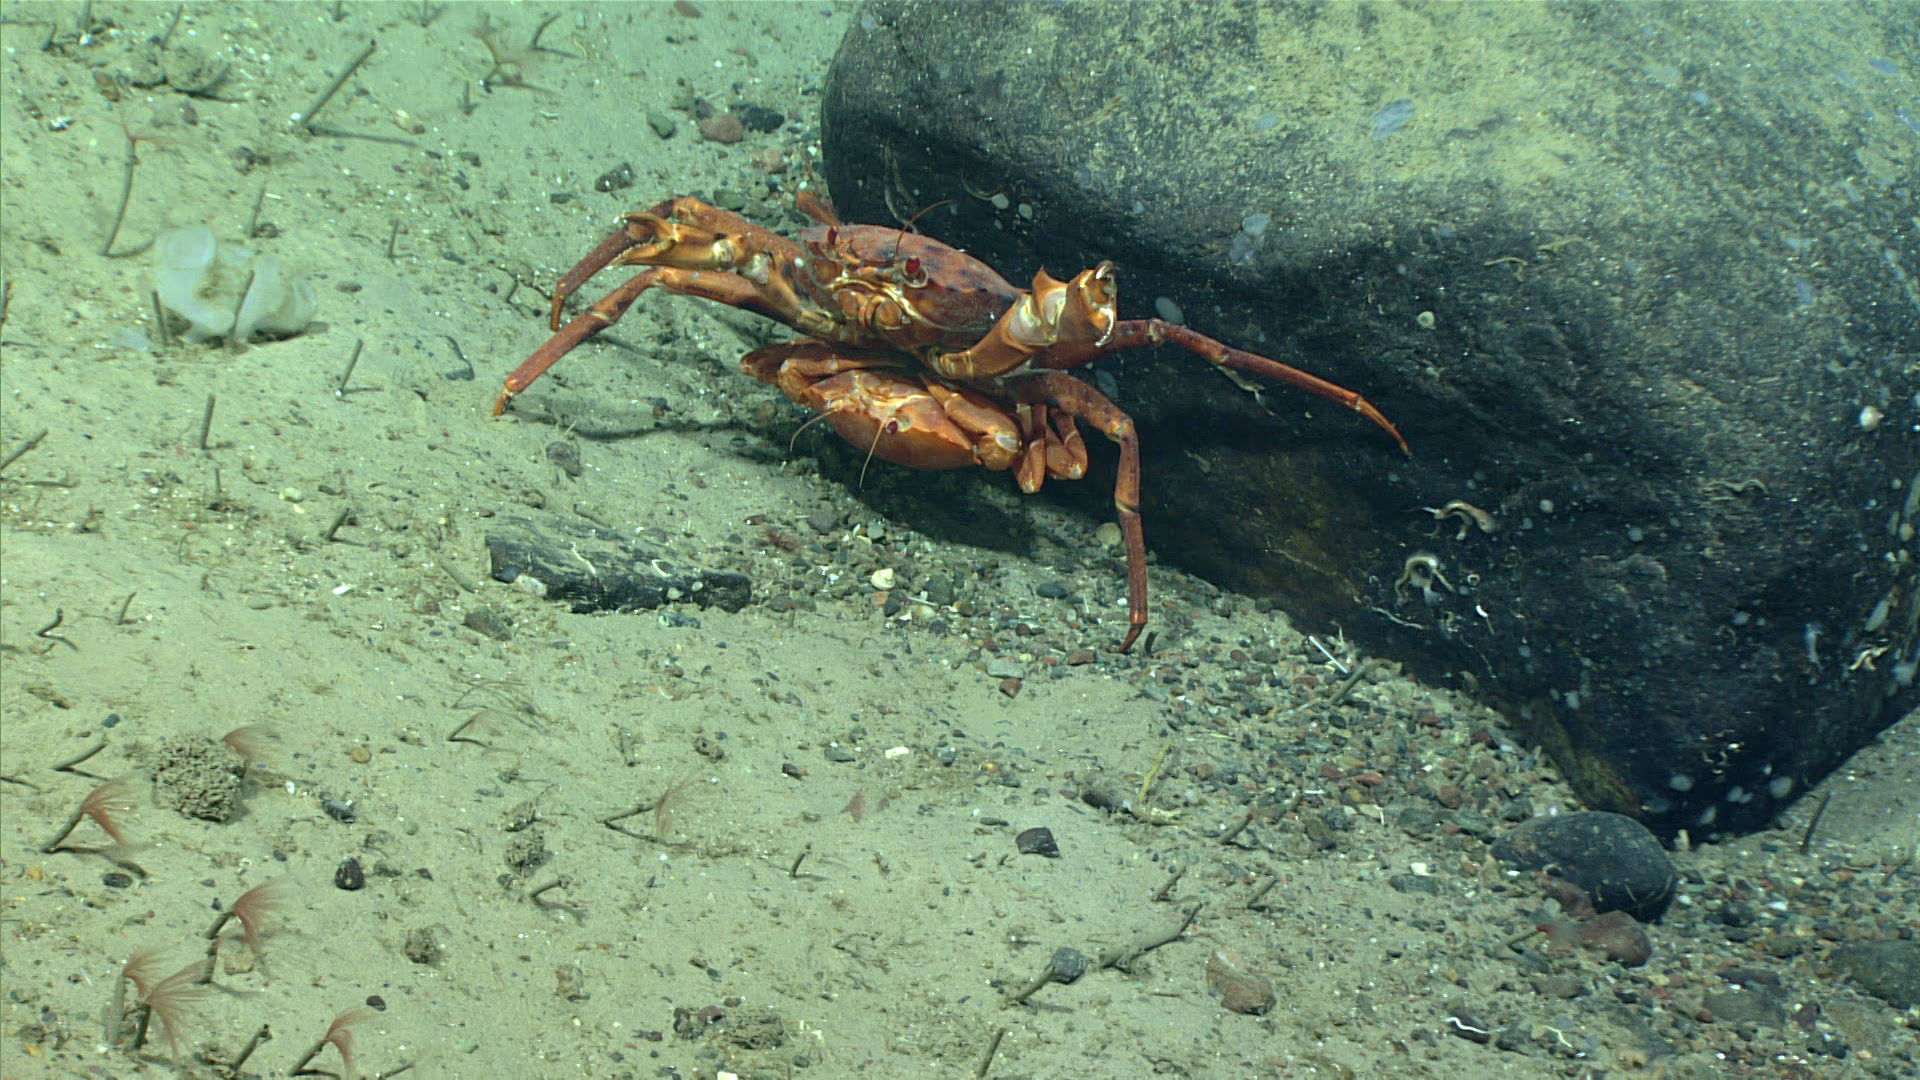 Mated pair of deep-sea red crabs, Chaceon quinquidens.